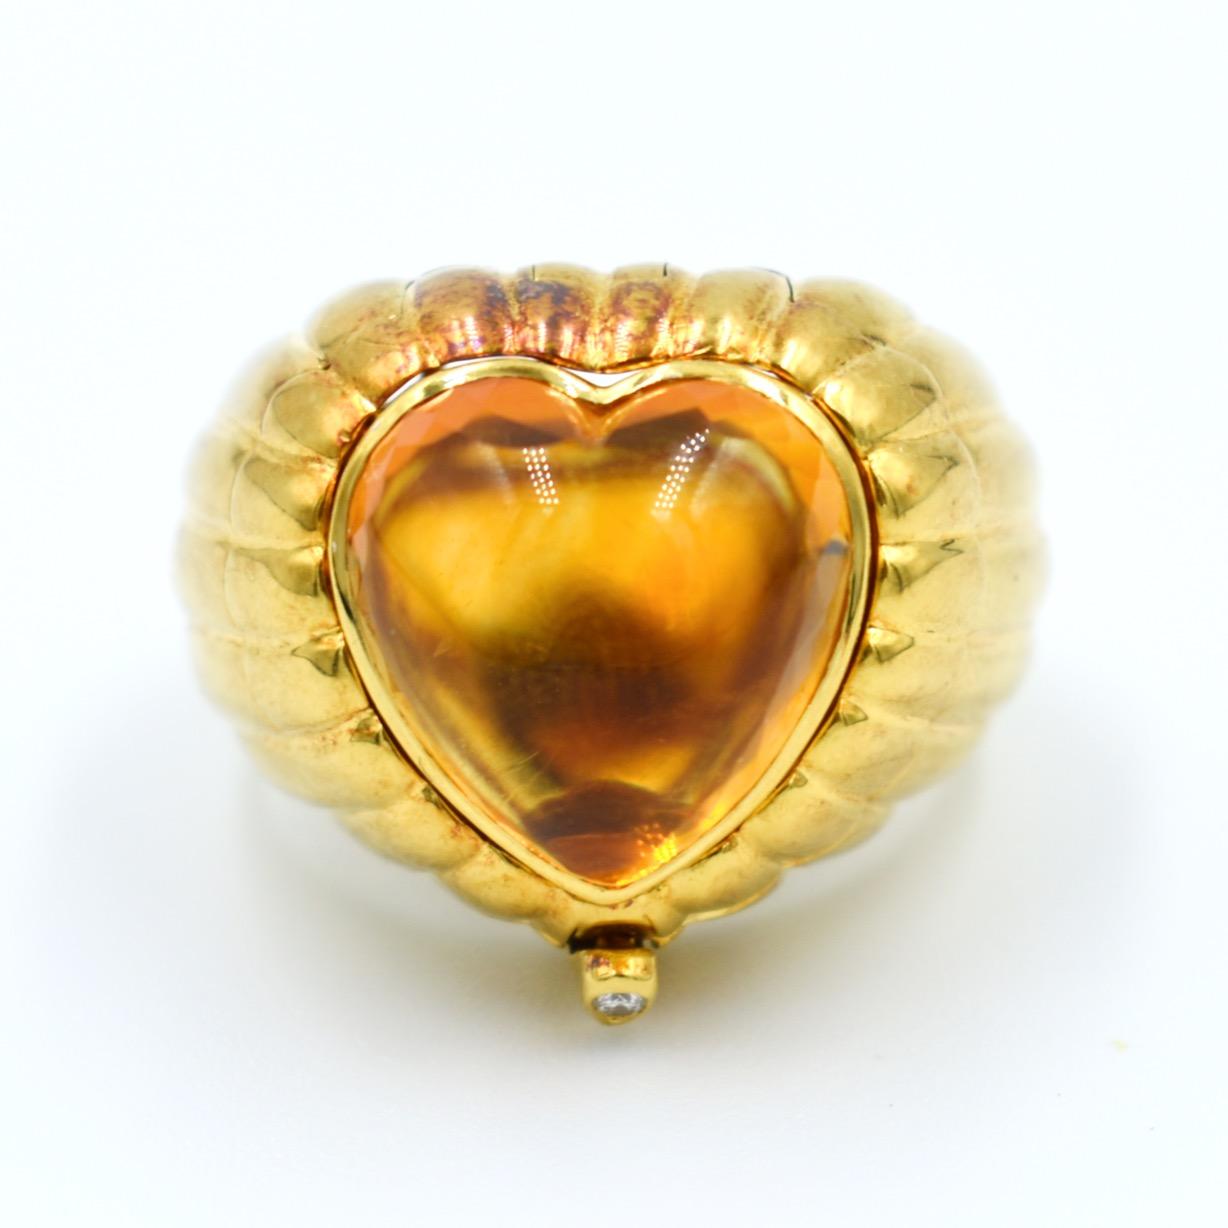 Women's Modular 3-in-1 Heart Ring in Gold with Amethyst, Citrine, Tourmaline Cabochons For Sale